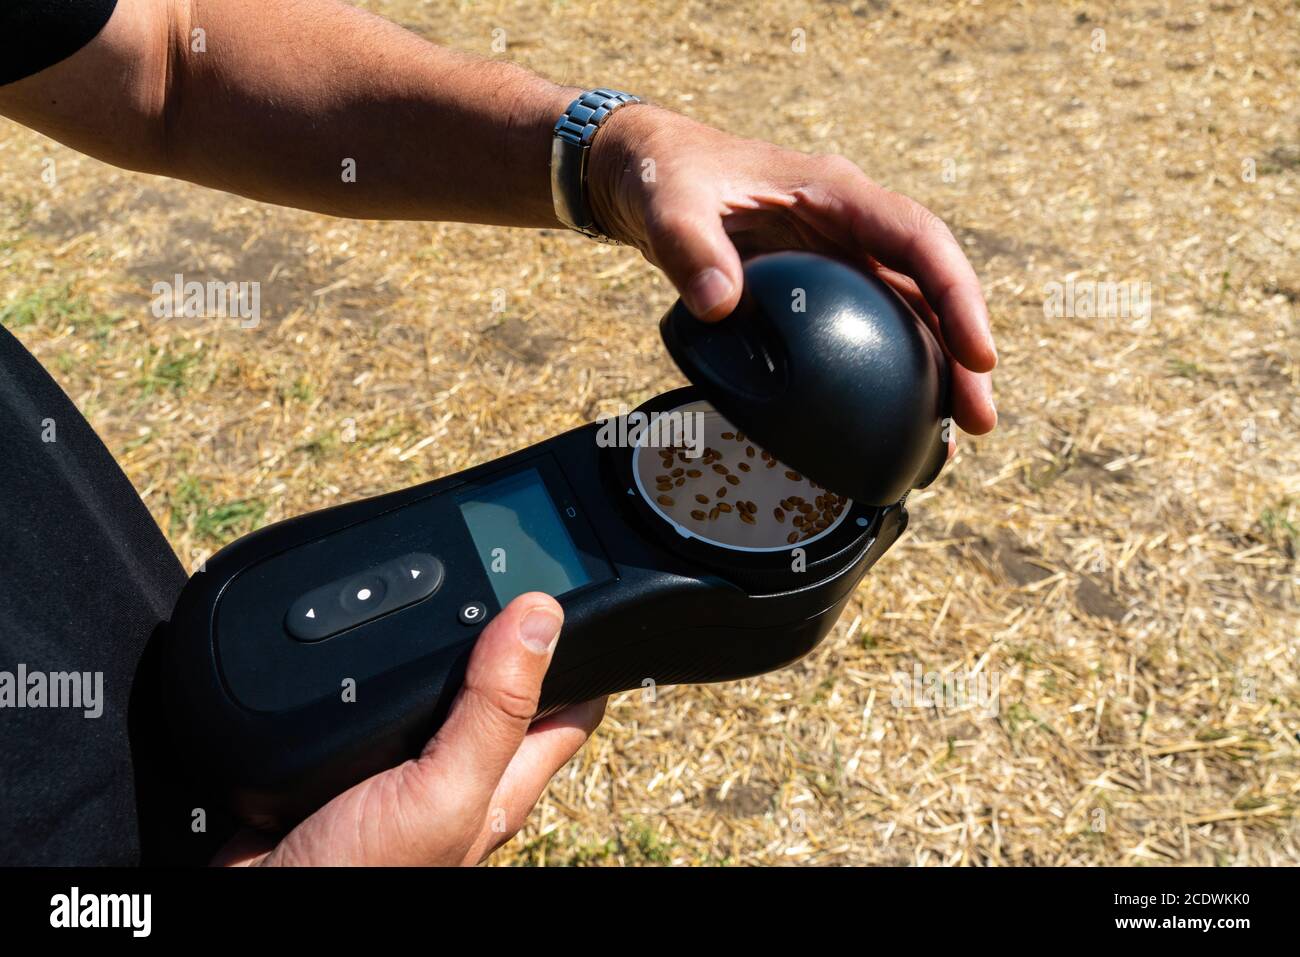 Mobile device for measuring the parameters of grain in the harvest. Smart farming and precision agriculture Stock Photo